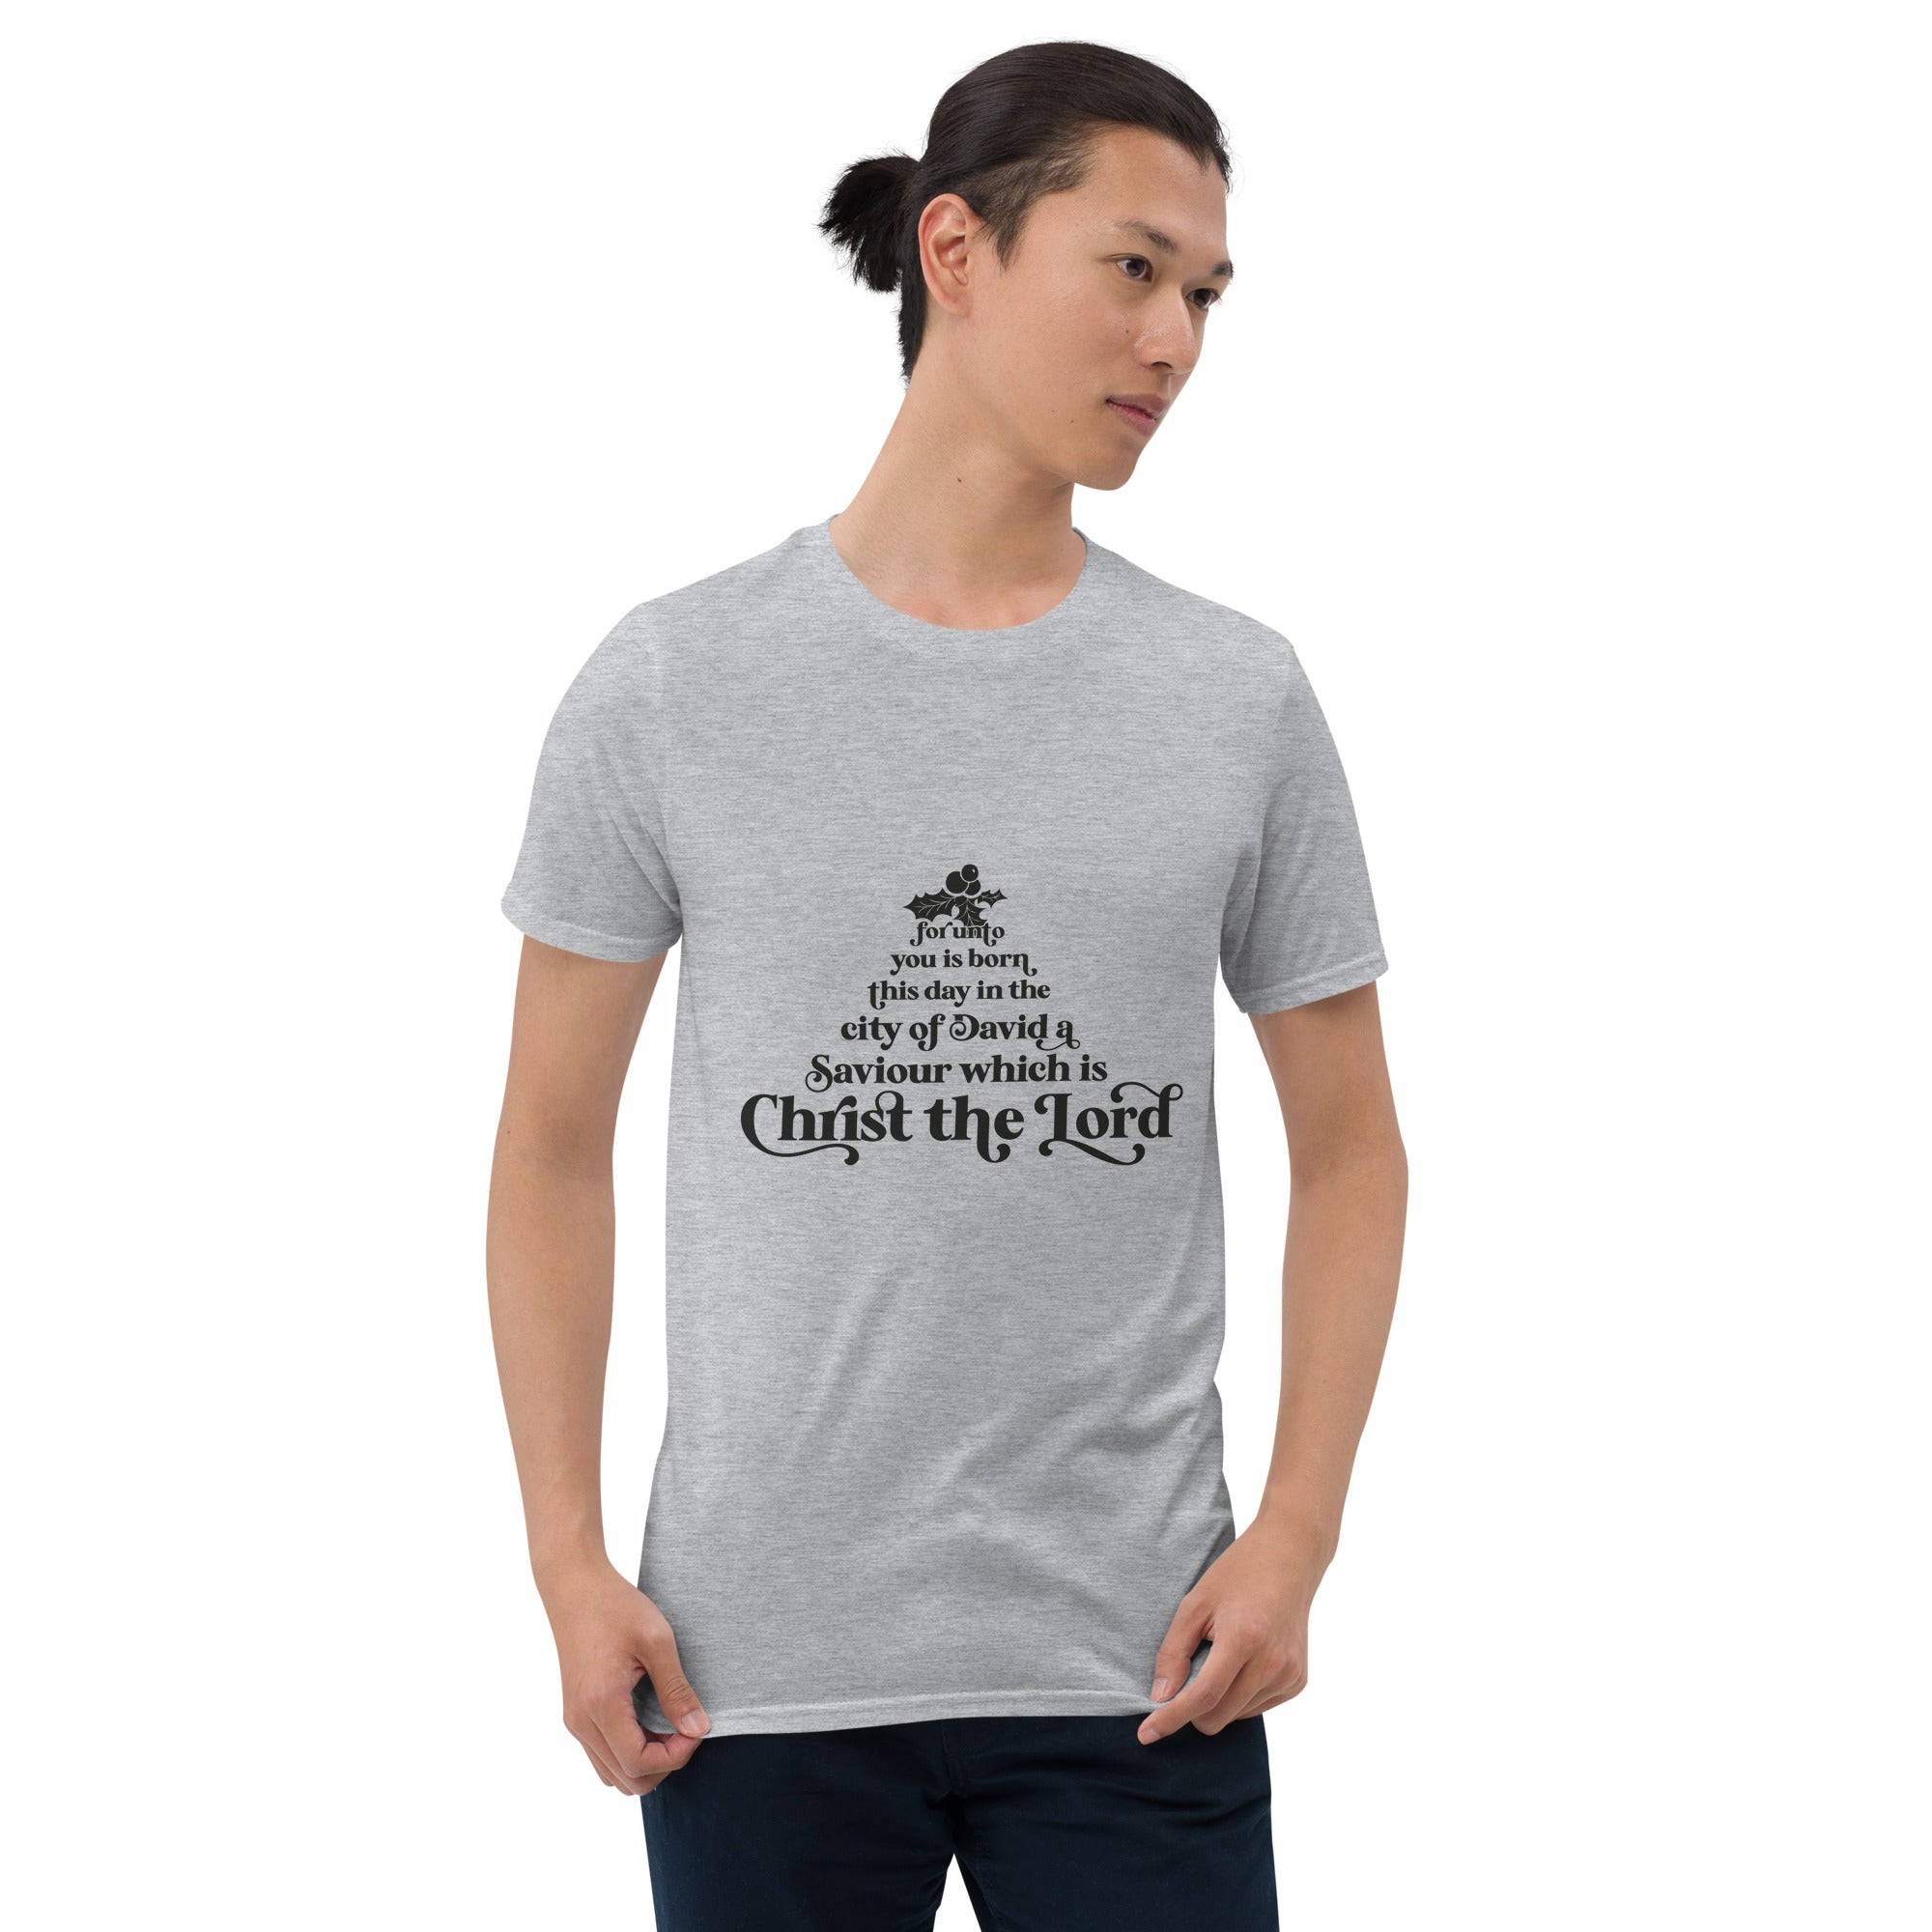 For Unto You Is Born This Day In The City Of David - Short-Sleeve Unisex T-Shirt